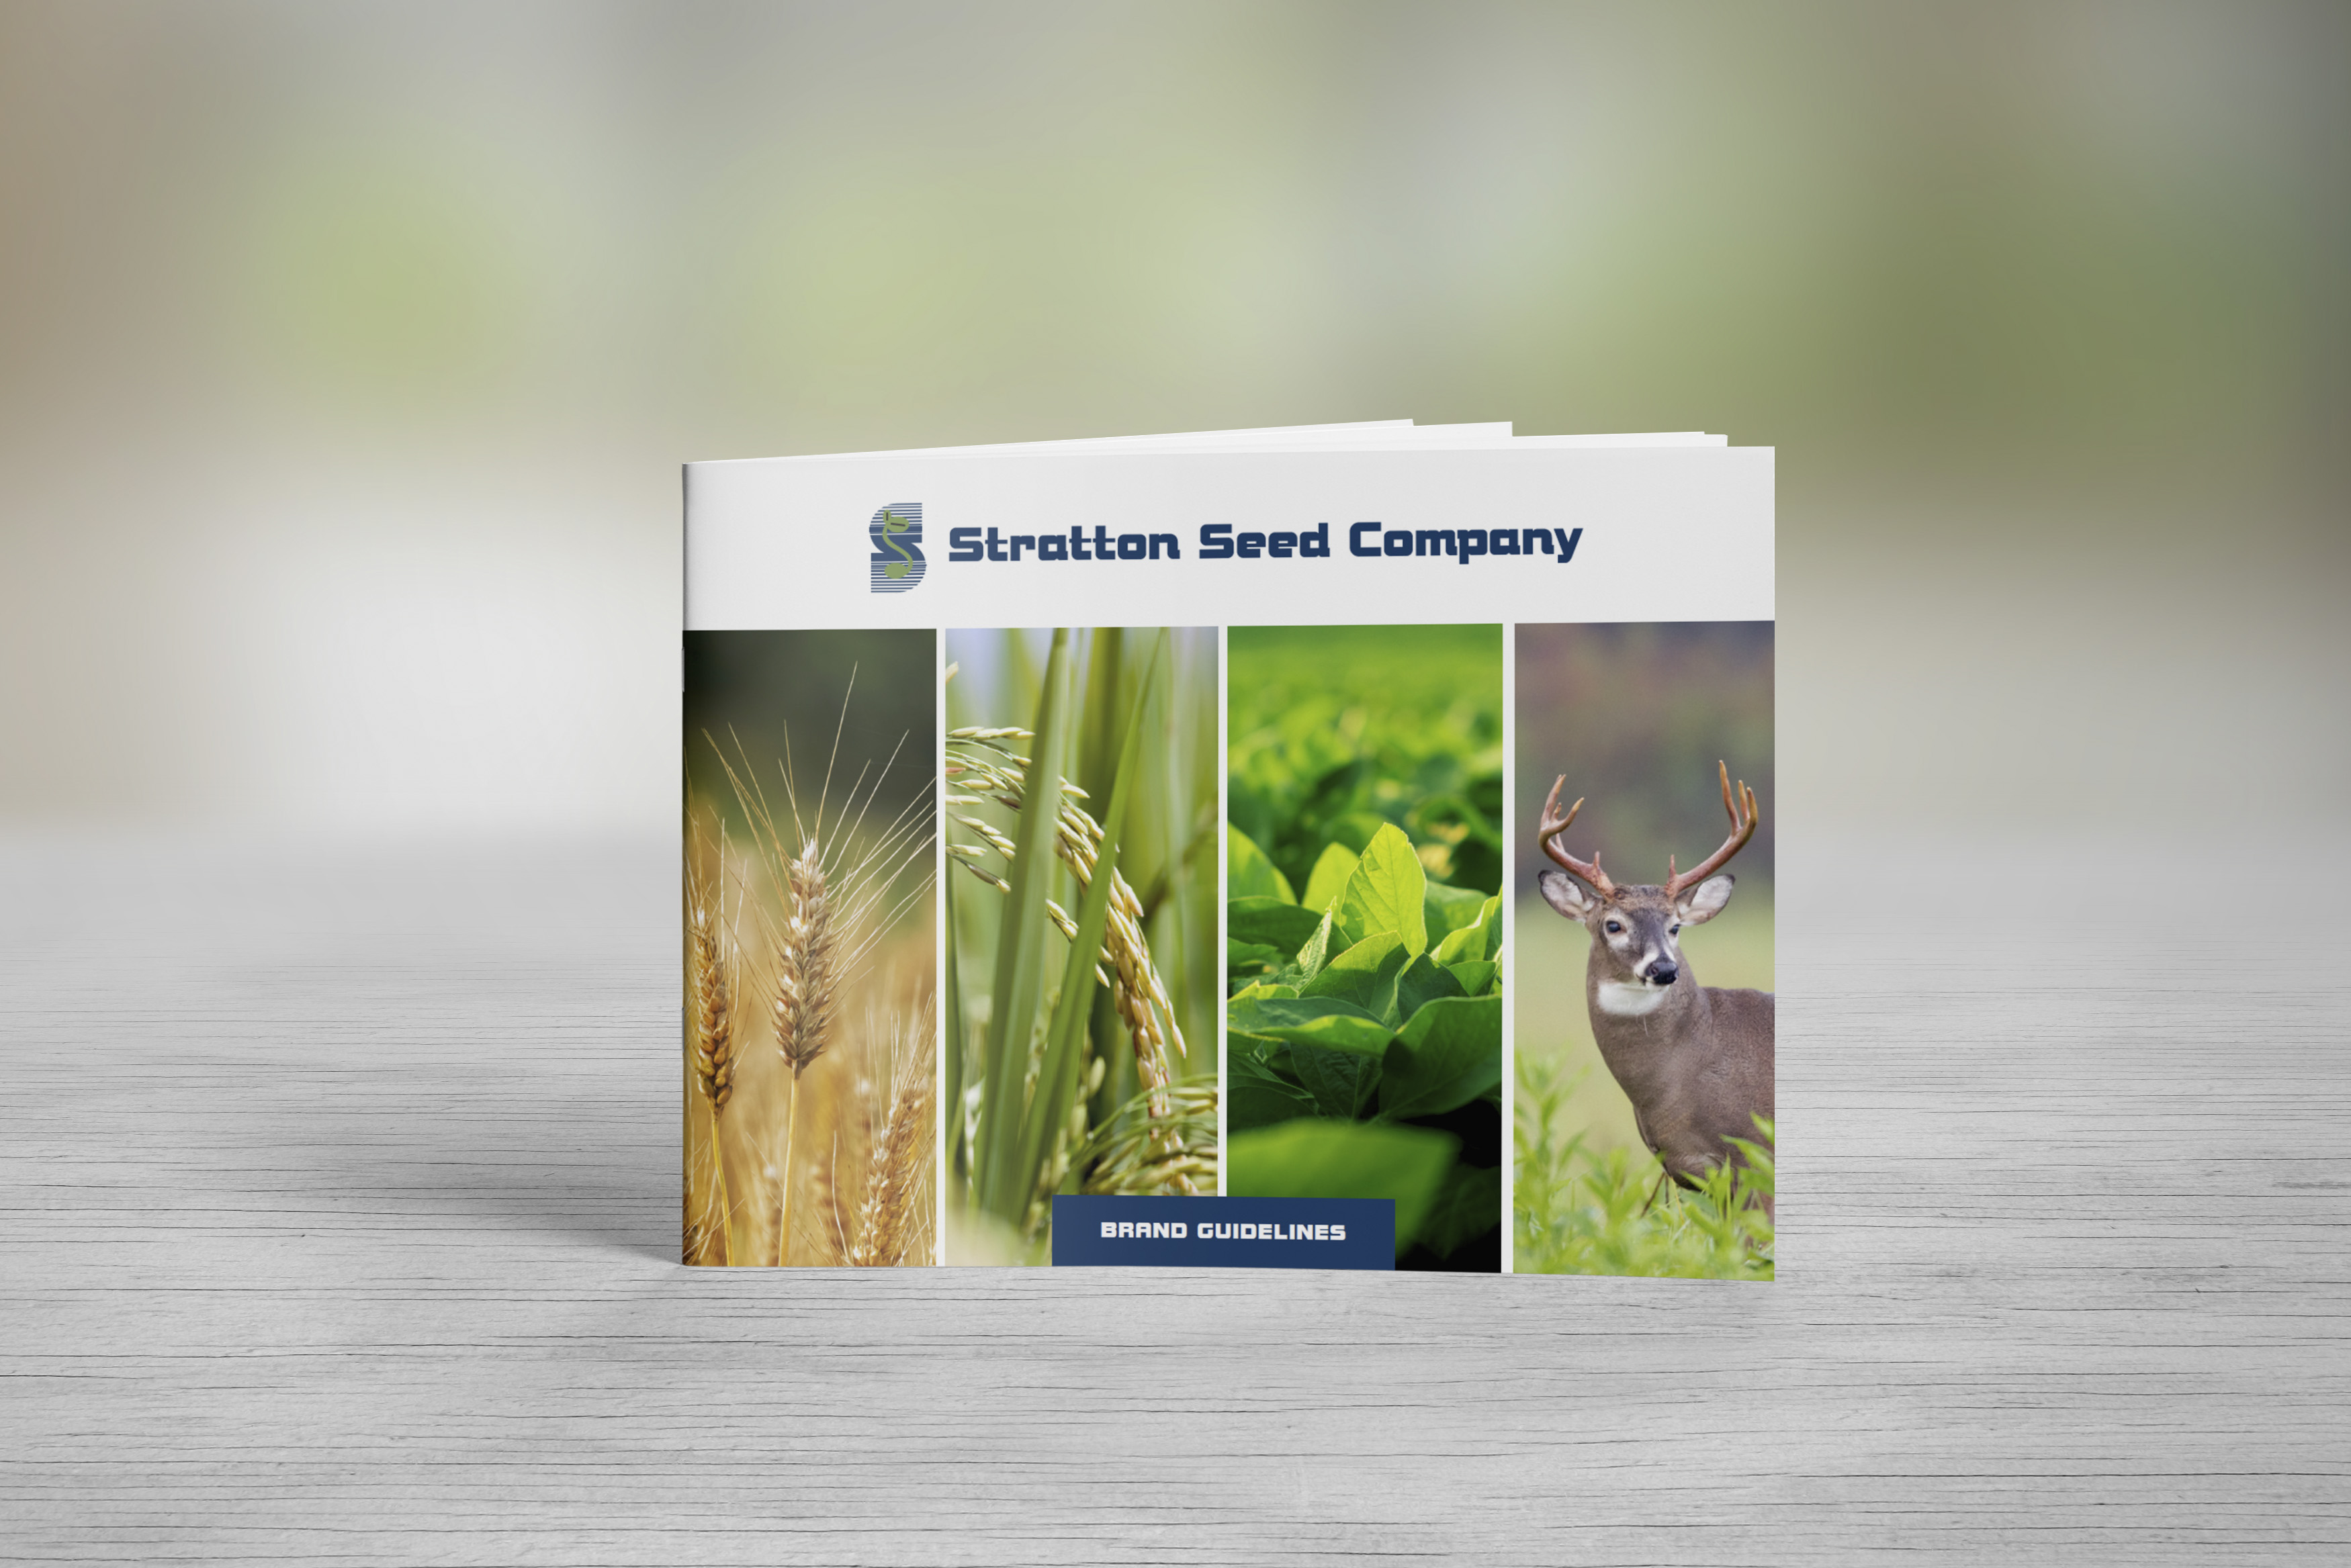 Stratton Seed branding guide sitting on table